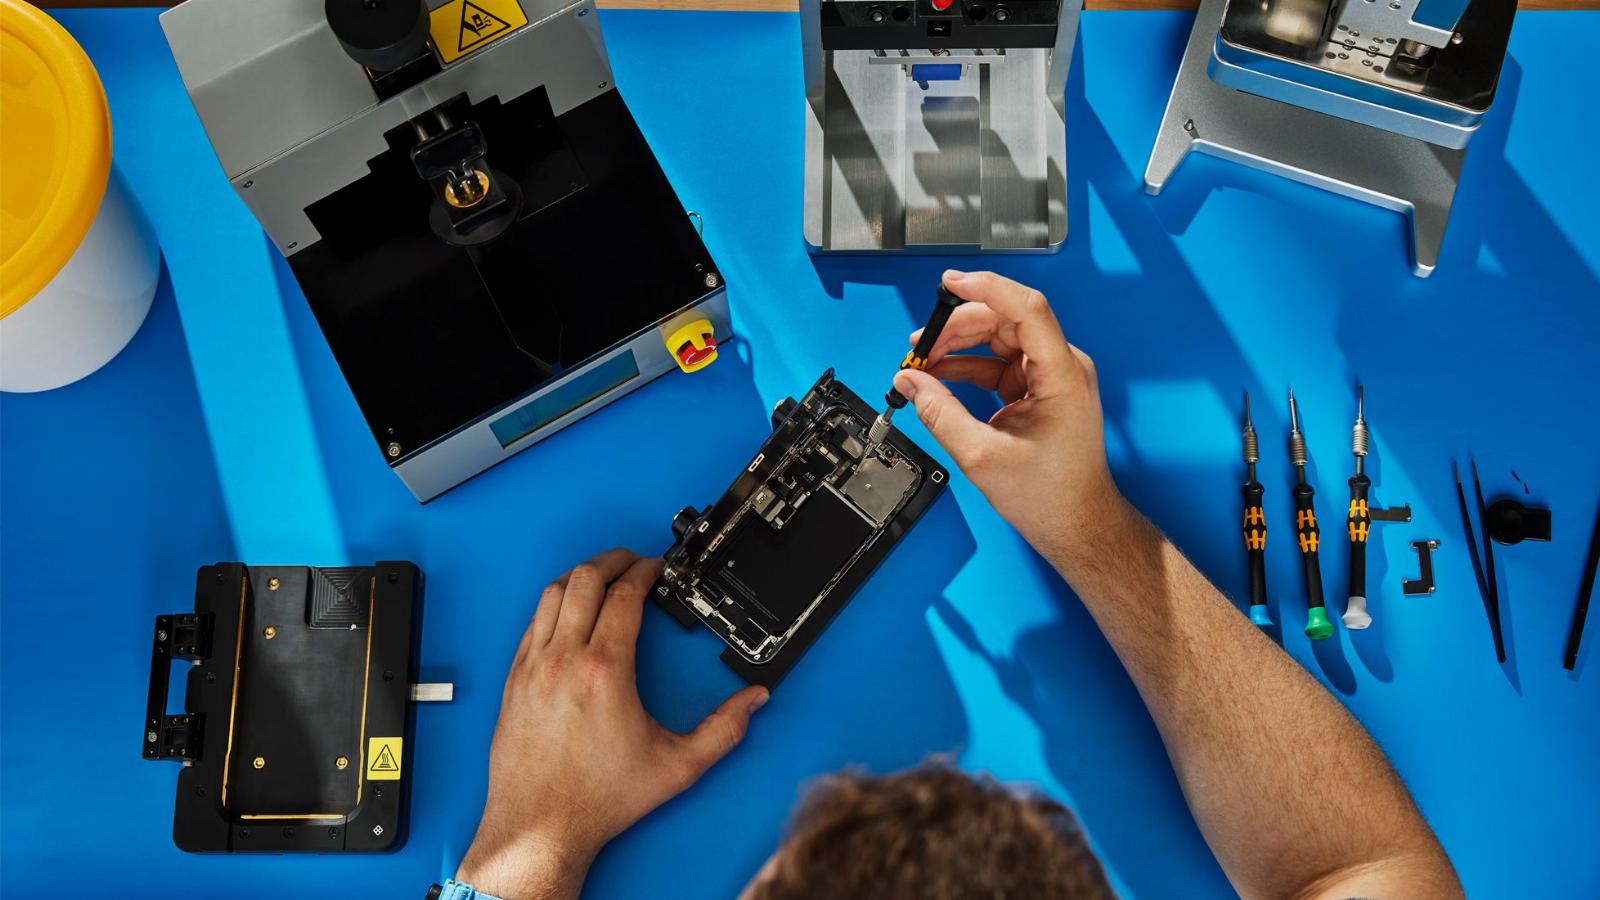 Apple opens access to used iPhone components for repair